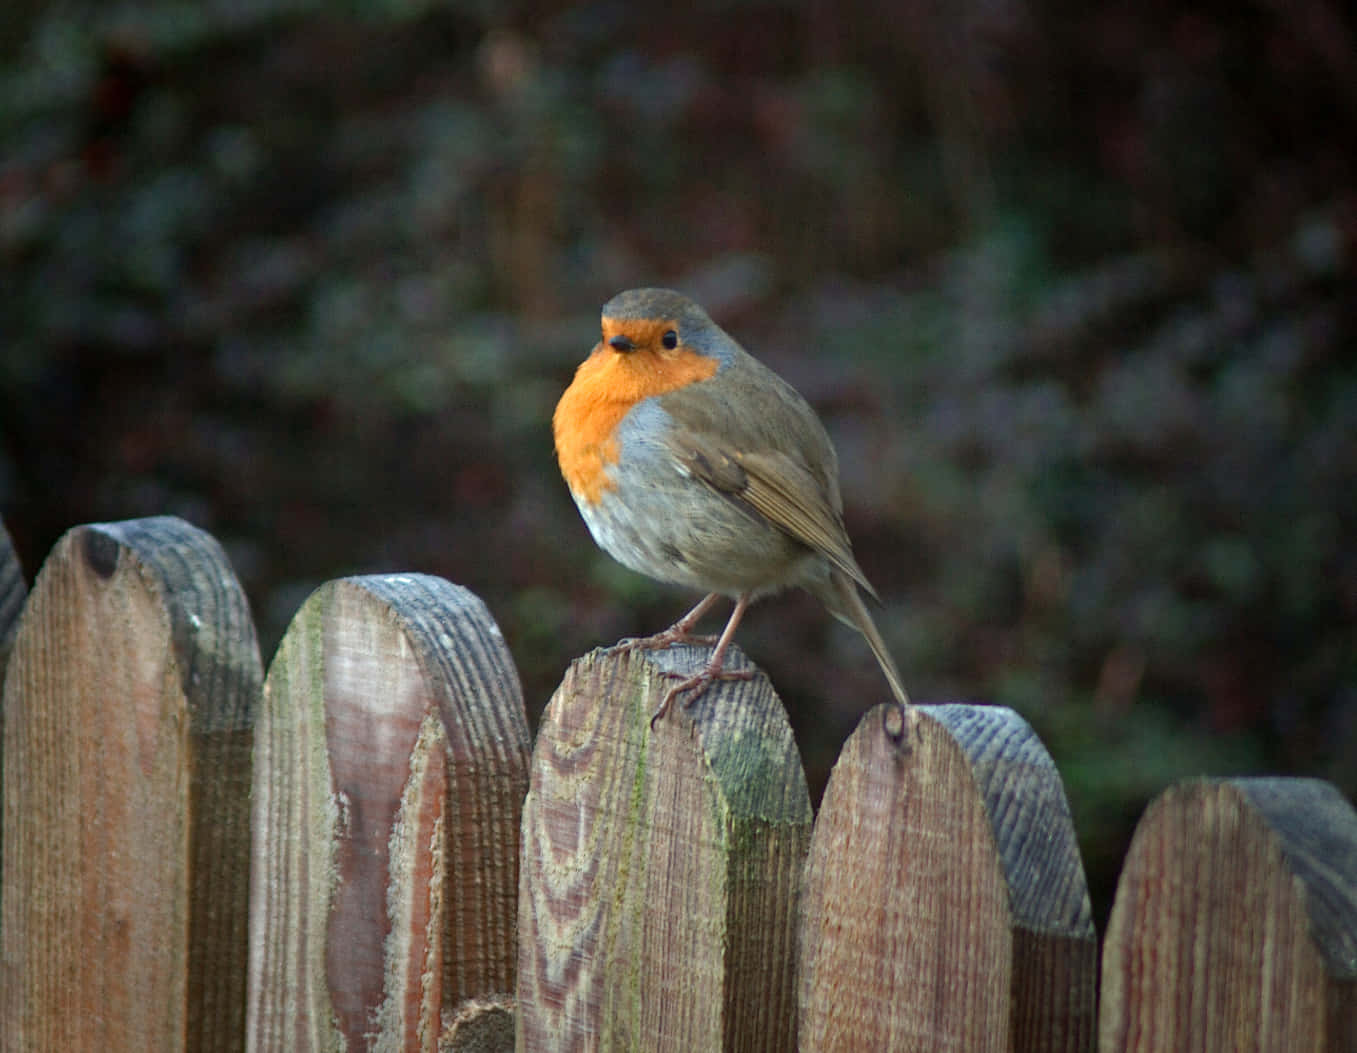 A blooming Robin resting in Blooming Greenery